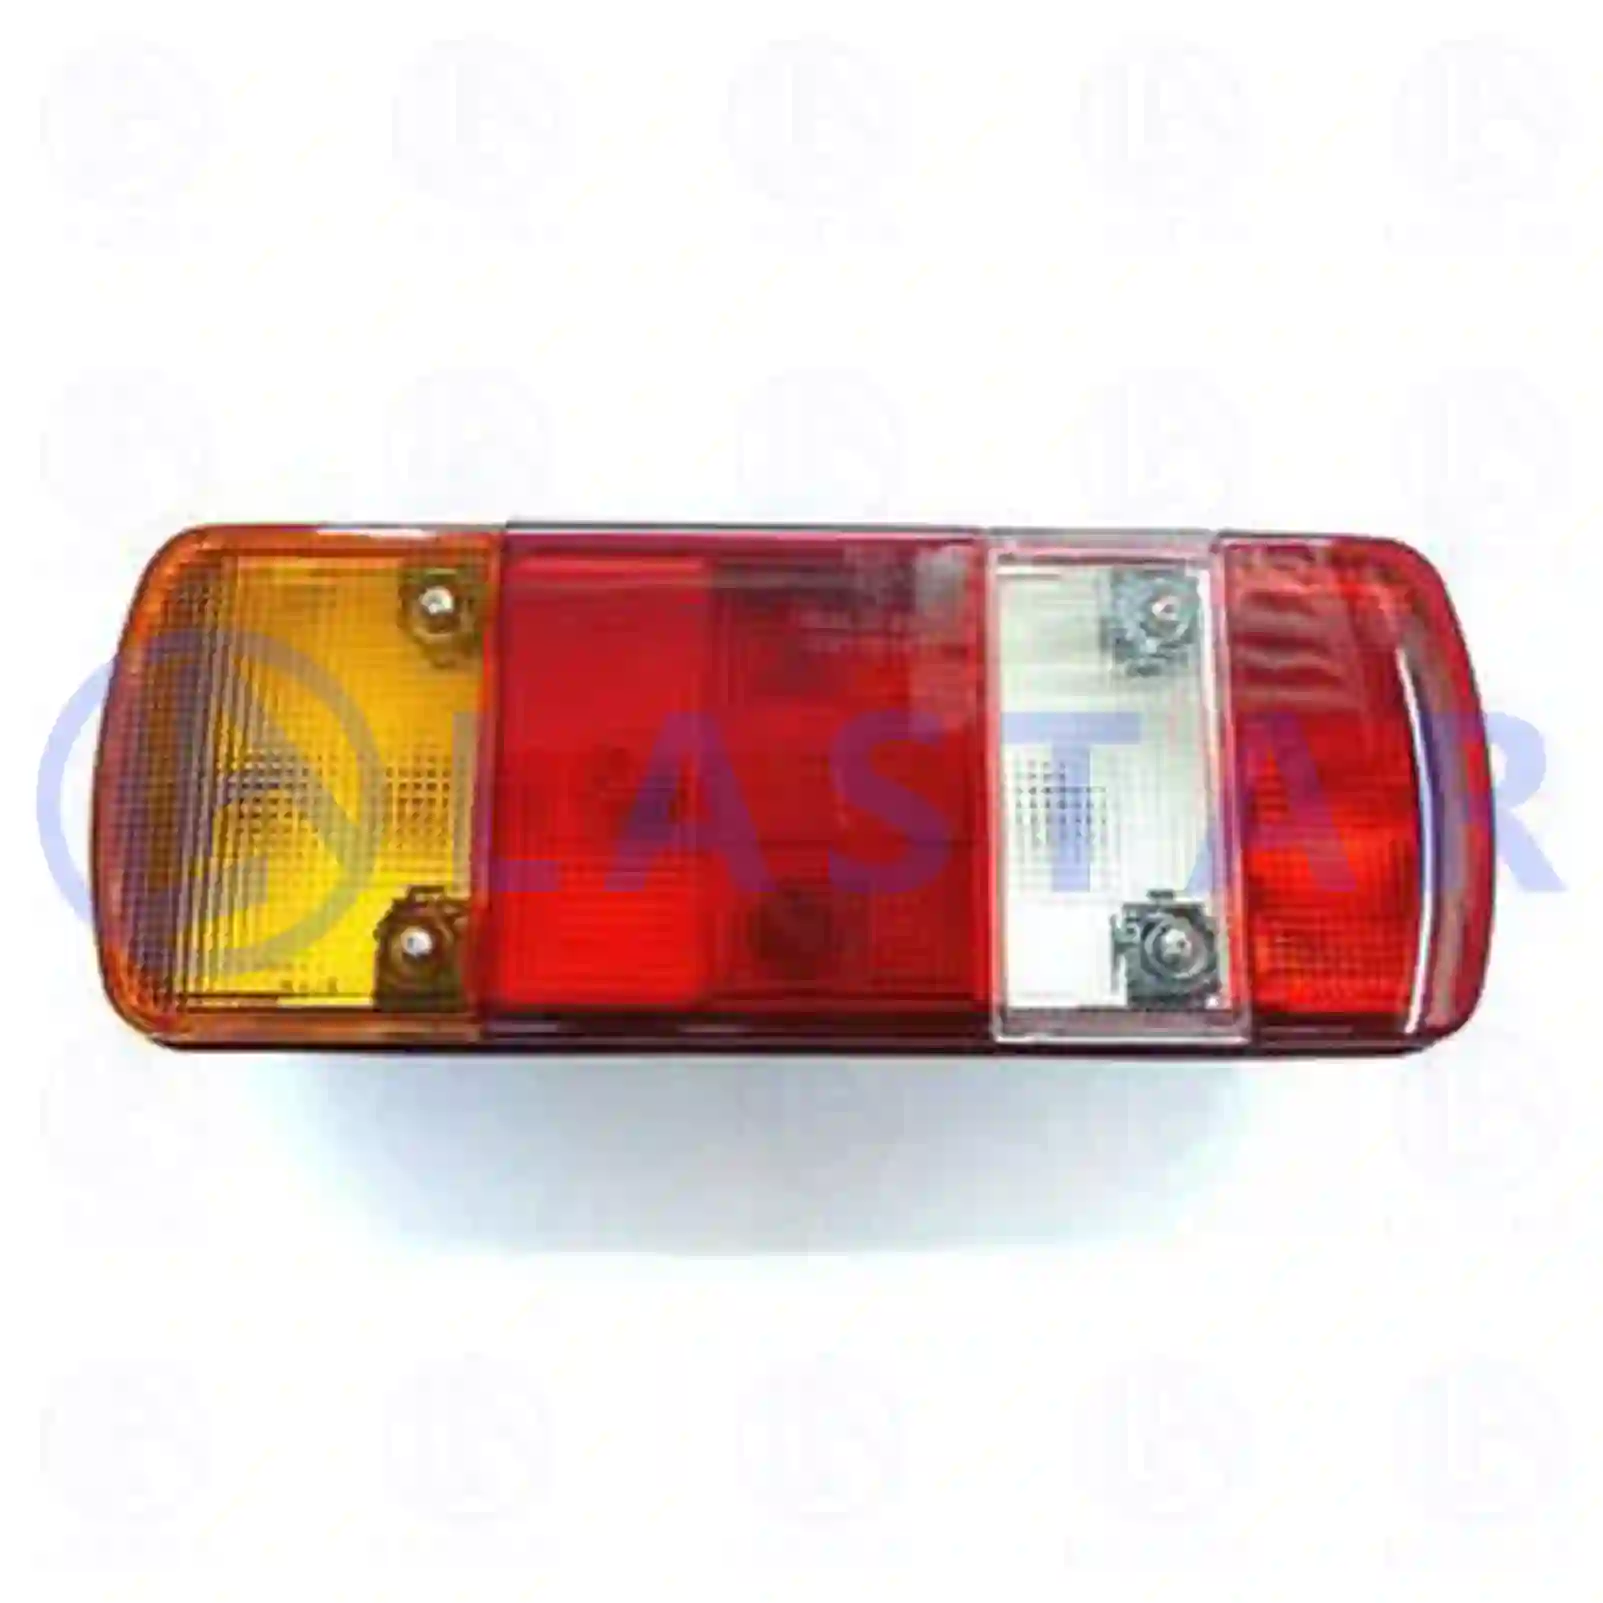 Tail lamp, right, 77711234, 0025446903, 0025447103, 6865440103, ZG21044-0008, ||  77711234 Lastar Spare Part | Truck Spare Parts, Auotomotive Spare Parts Tail lamp, right, 77711234, 0025446903, 0025447103, 6865440103, ZG21044-0008, ||  77711234 Lastar Spare Part | Truck Spare Parts, Auotomotive Spare Parts